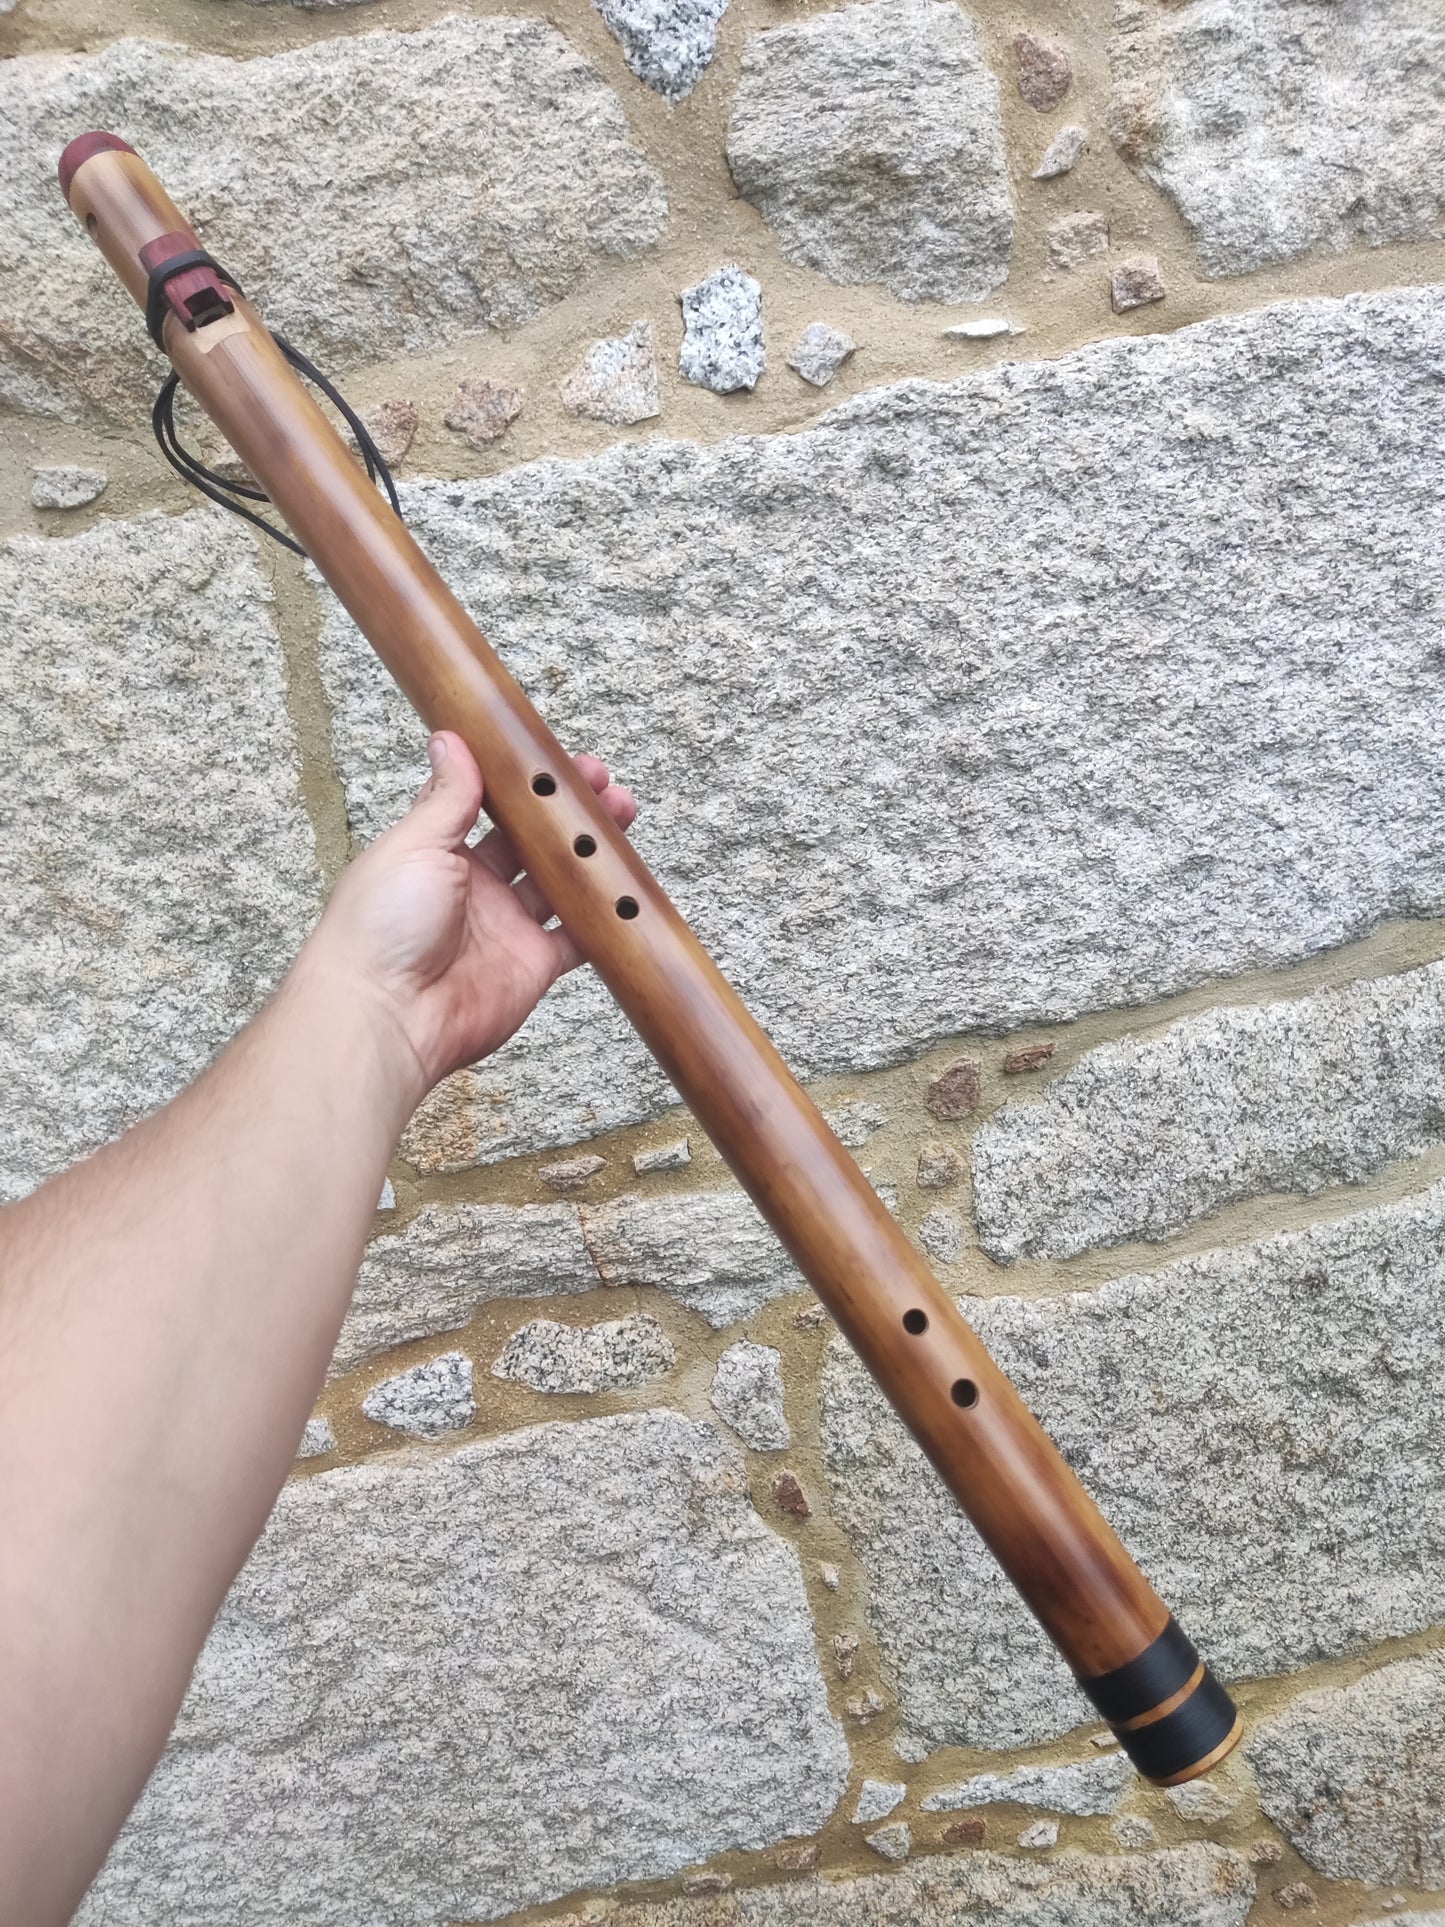 RESERVED FOR Anthony: Low A Akebono Flute built in the Native American Style at A432Hz